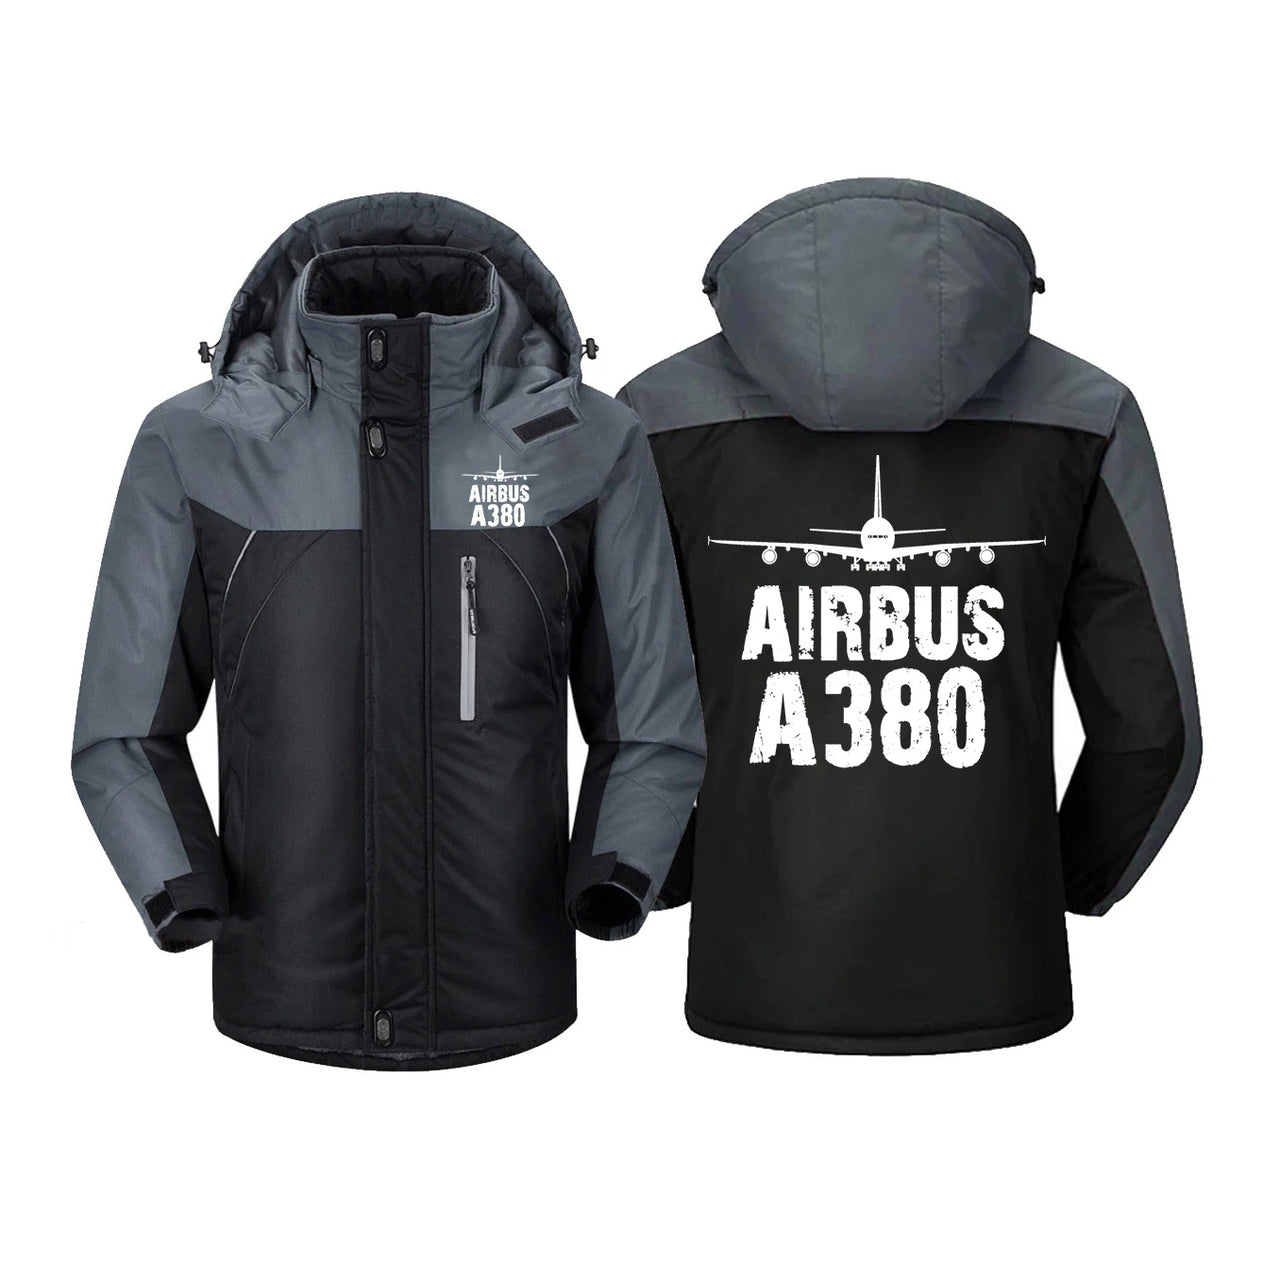 Airbus A380 & Plane Designed Thick Winter Jackets